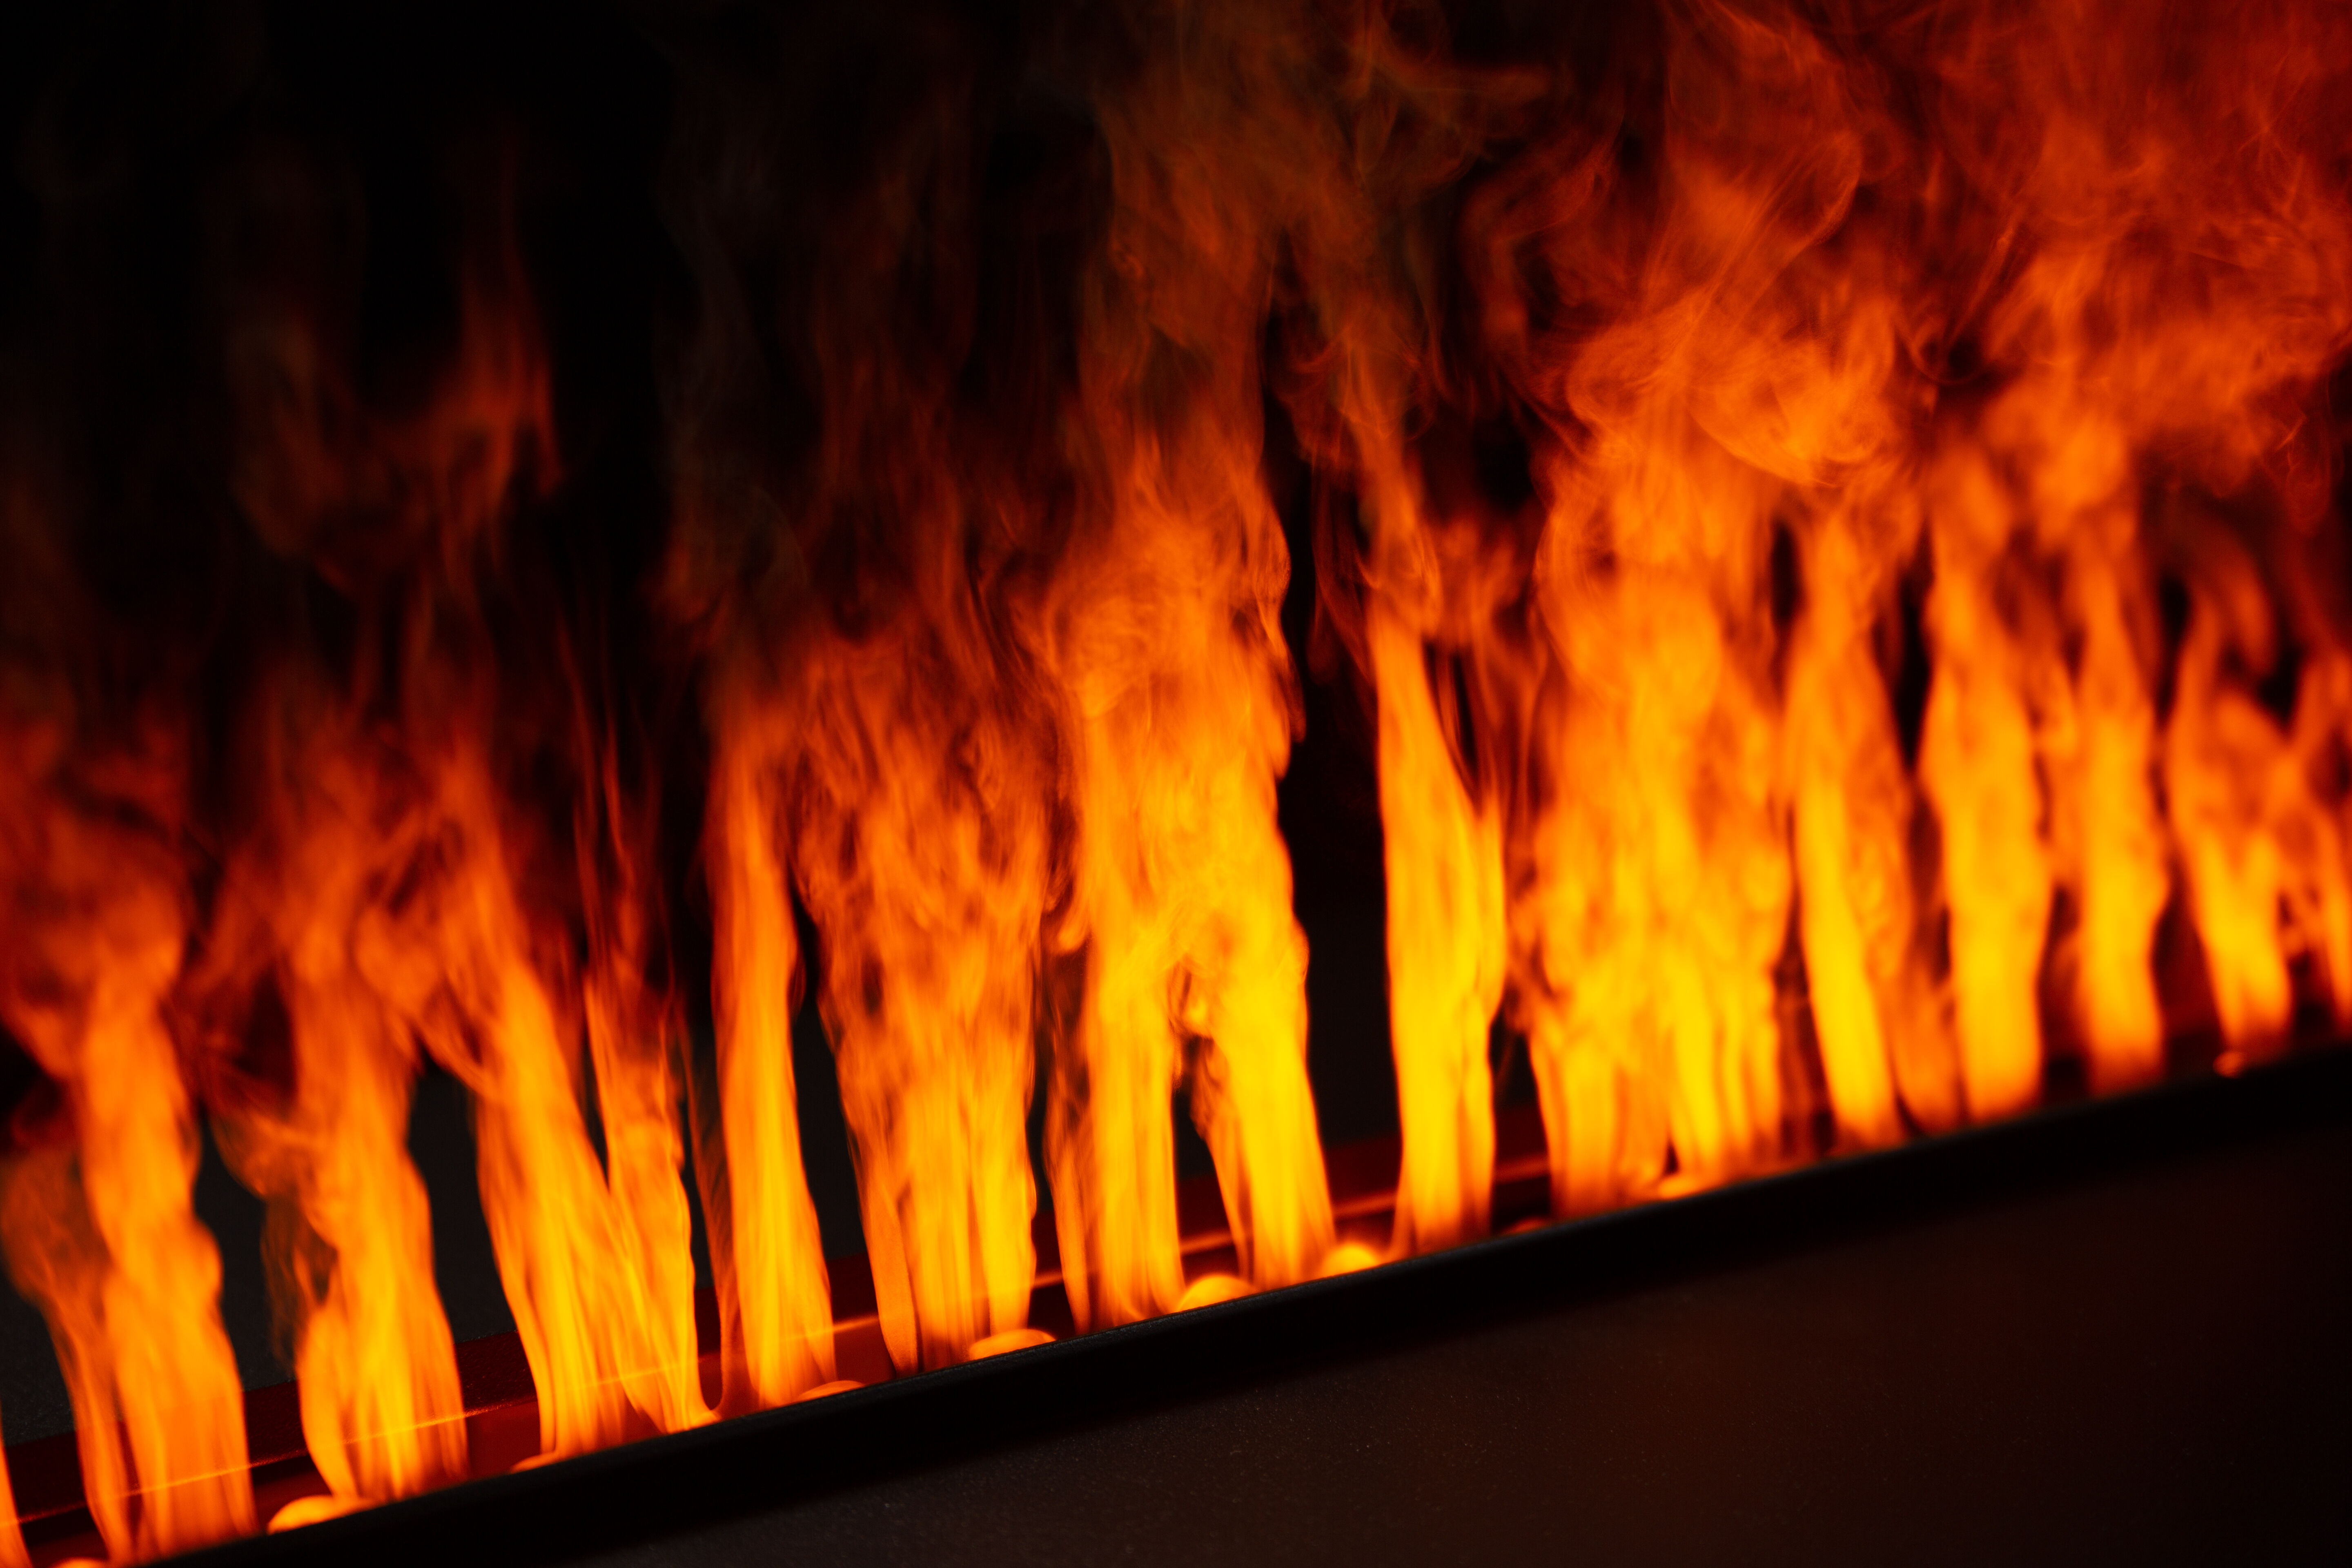 A close-up view of the Dimplex Opti-Myst electric fireplace's vibrant, realistic orange flames.